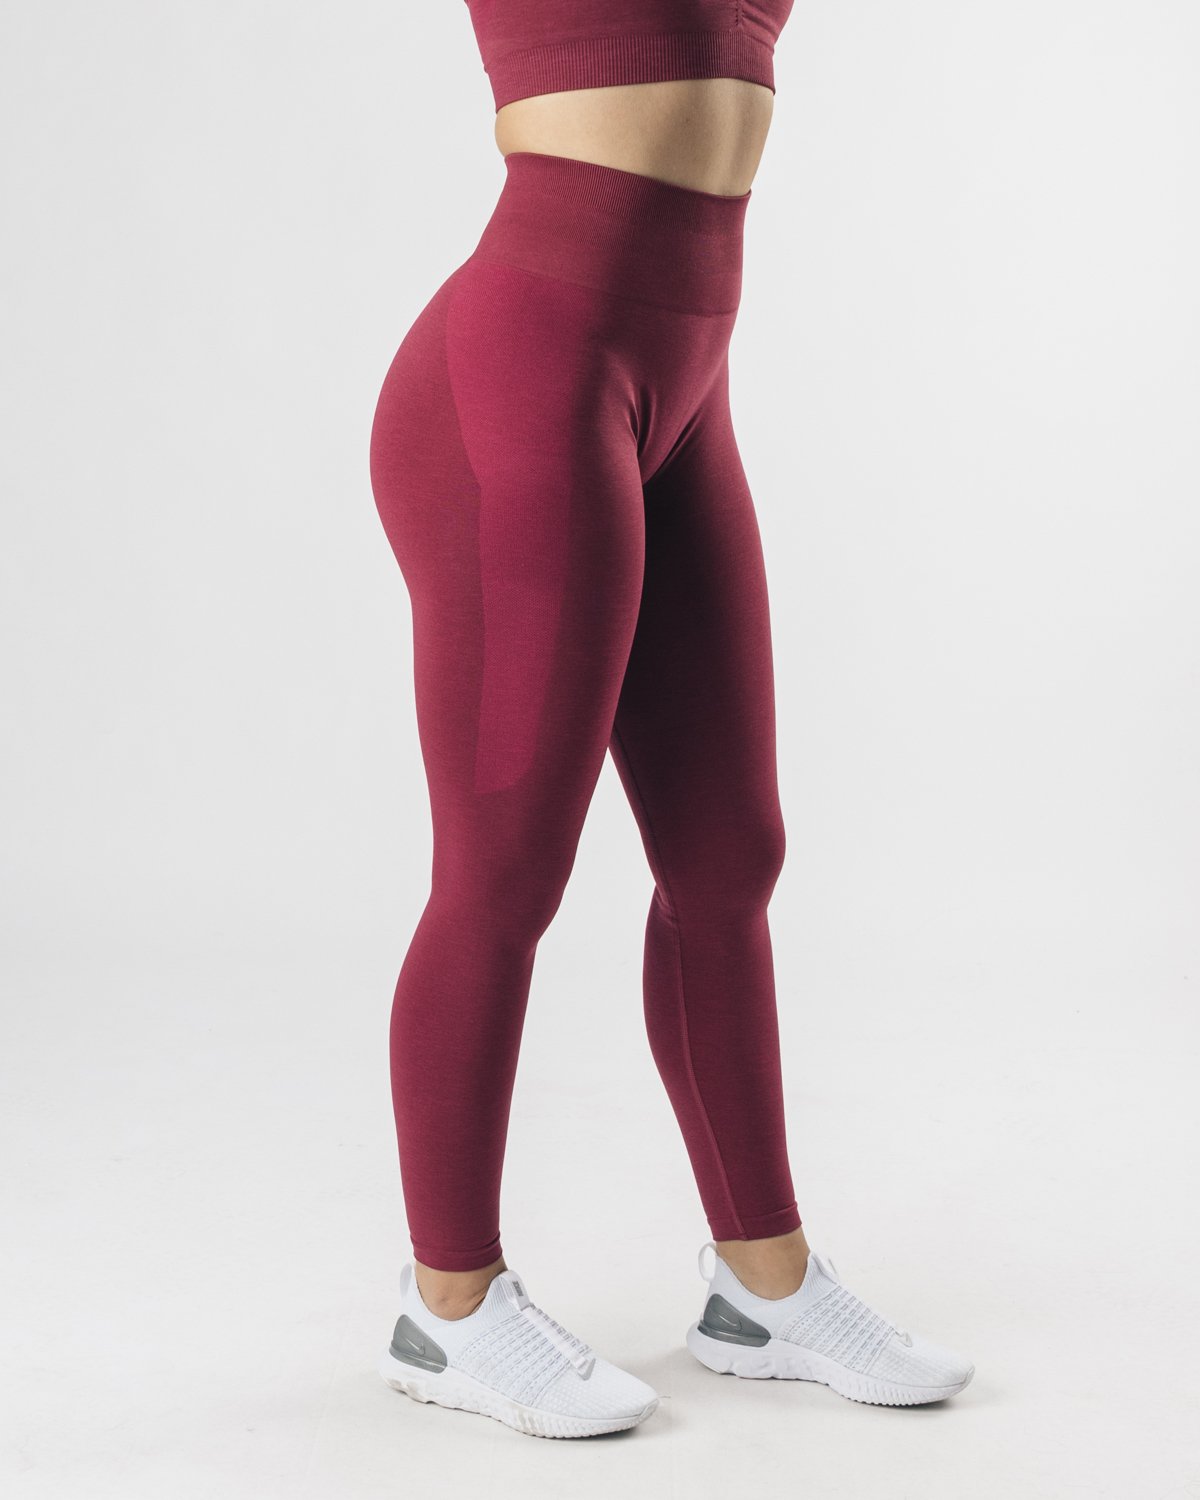 Are Alphalete Amplify Leggings Worth It We Tested